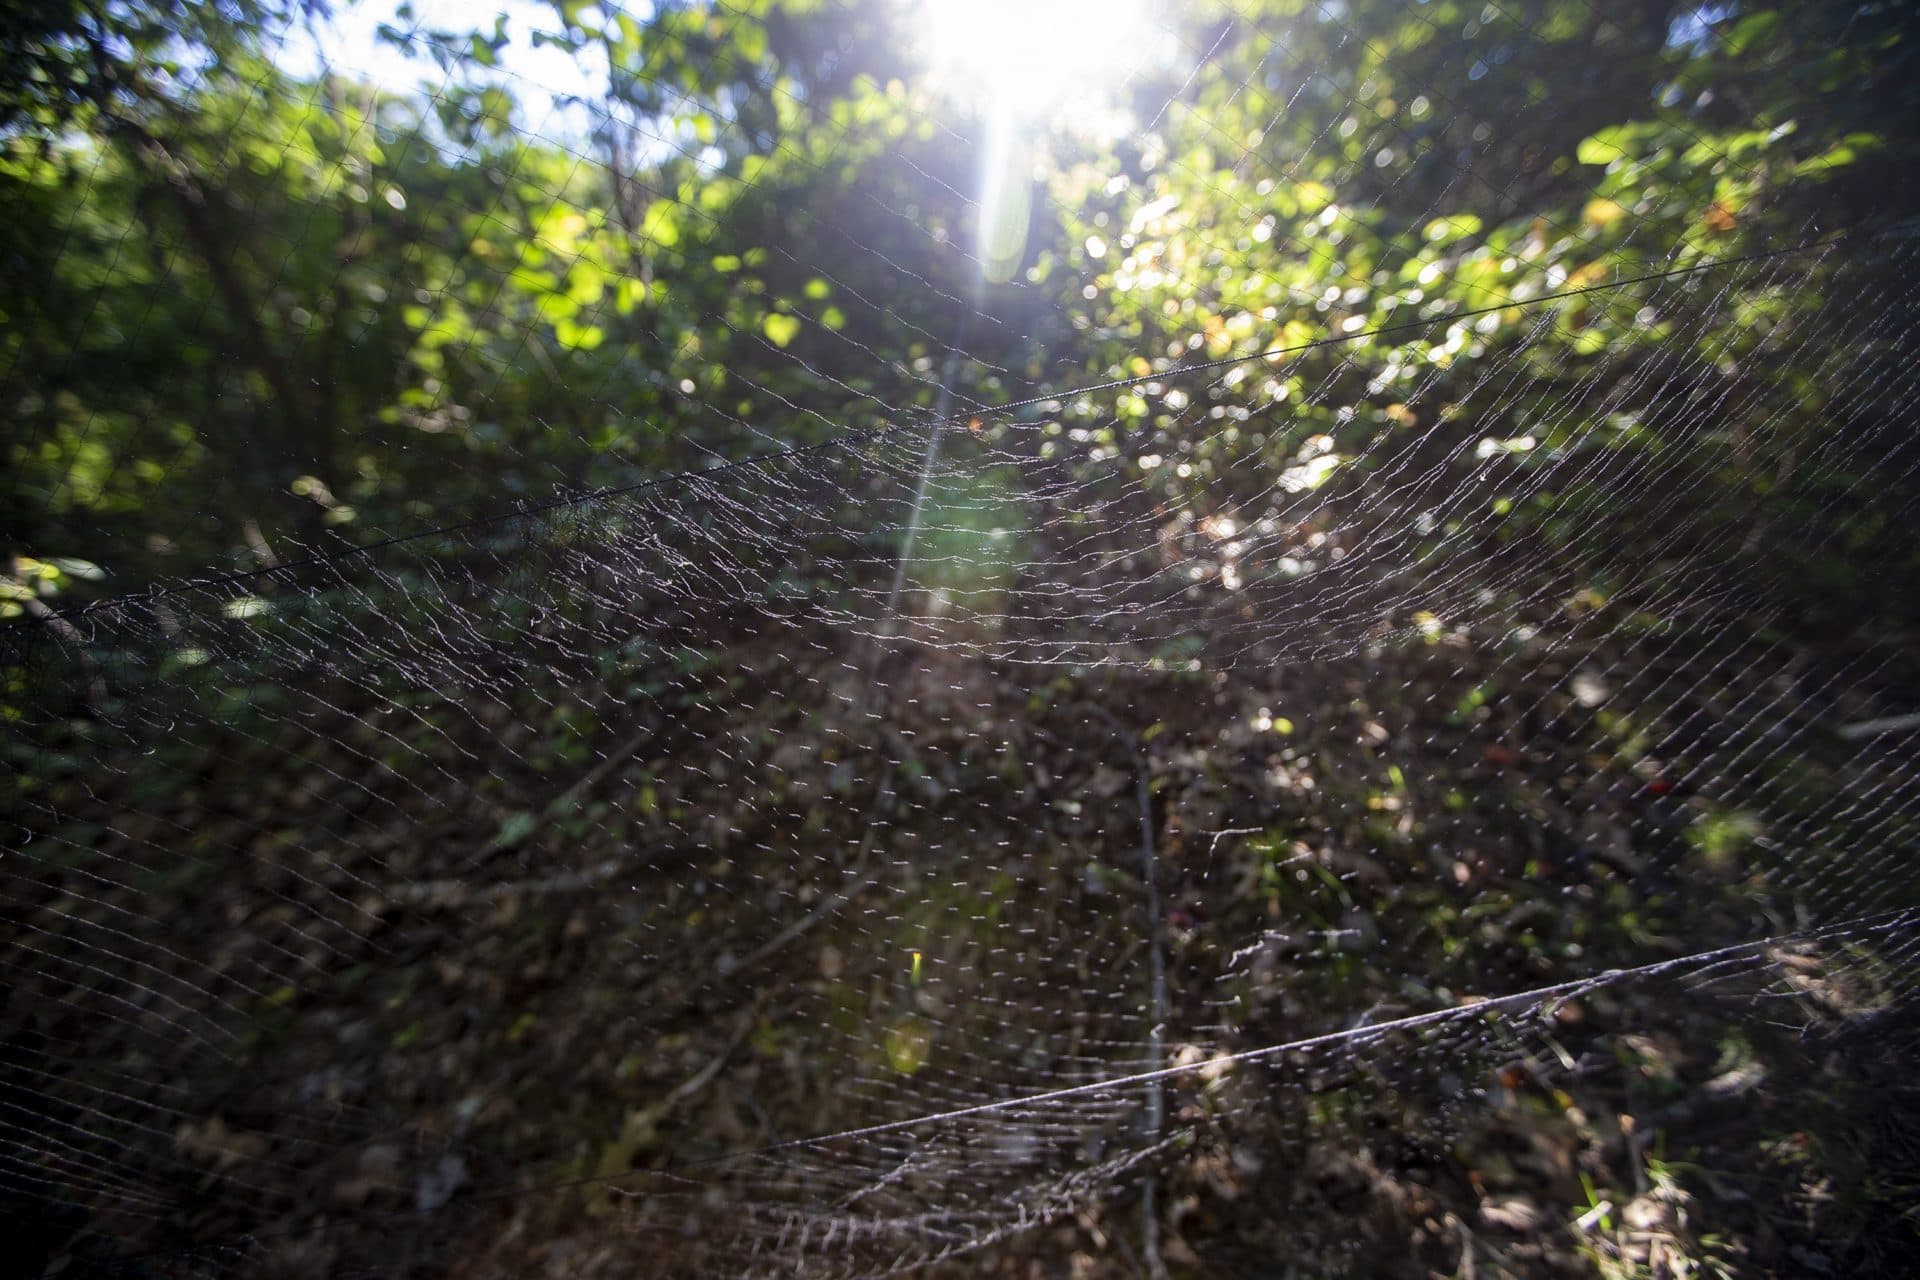 Along the paths in the woods at Manomet, netting is used to collect migrating birds for tagging and research. (Jesse Costa/WBUR)